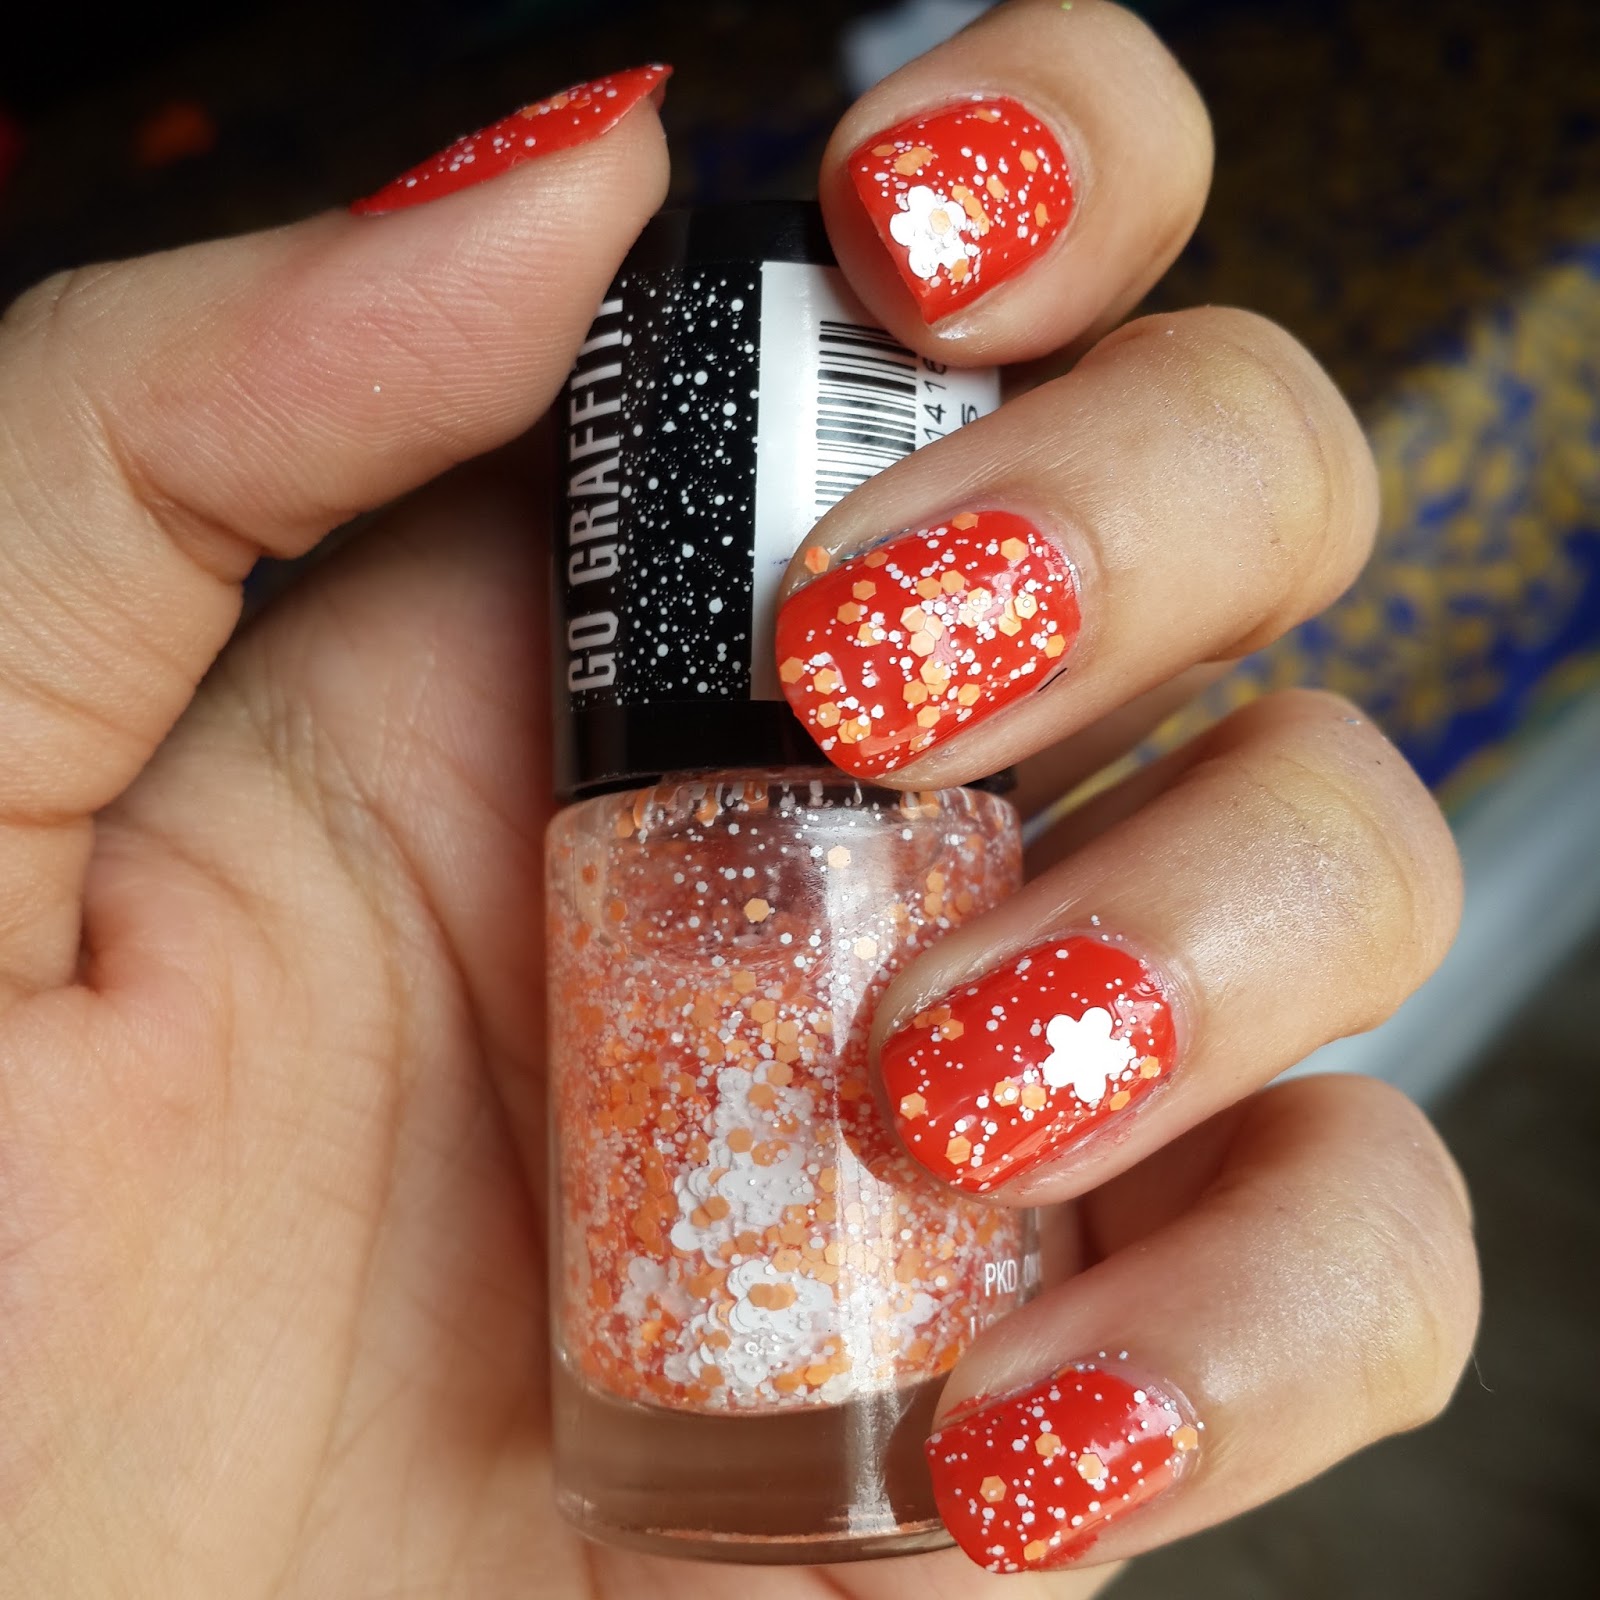 DIY: Nail Art With Maybelline's Glitter Mania!